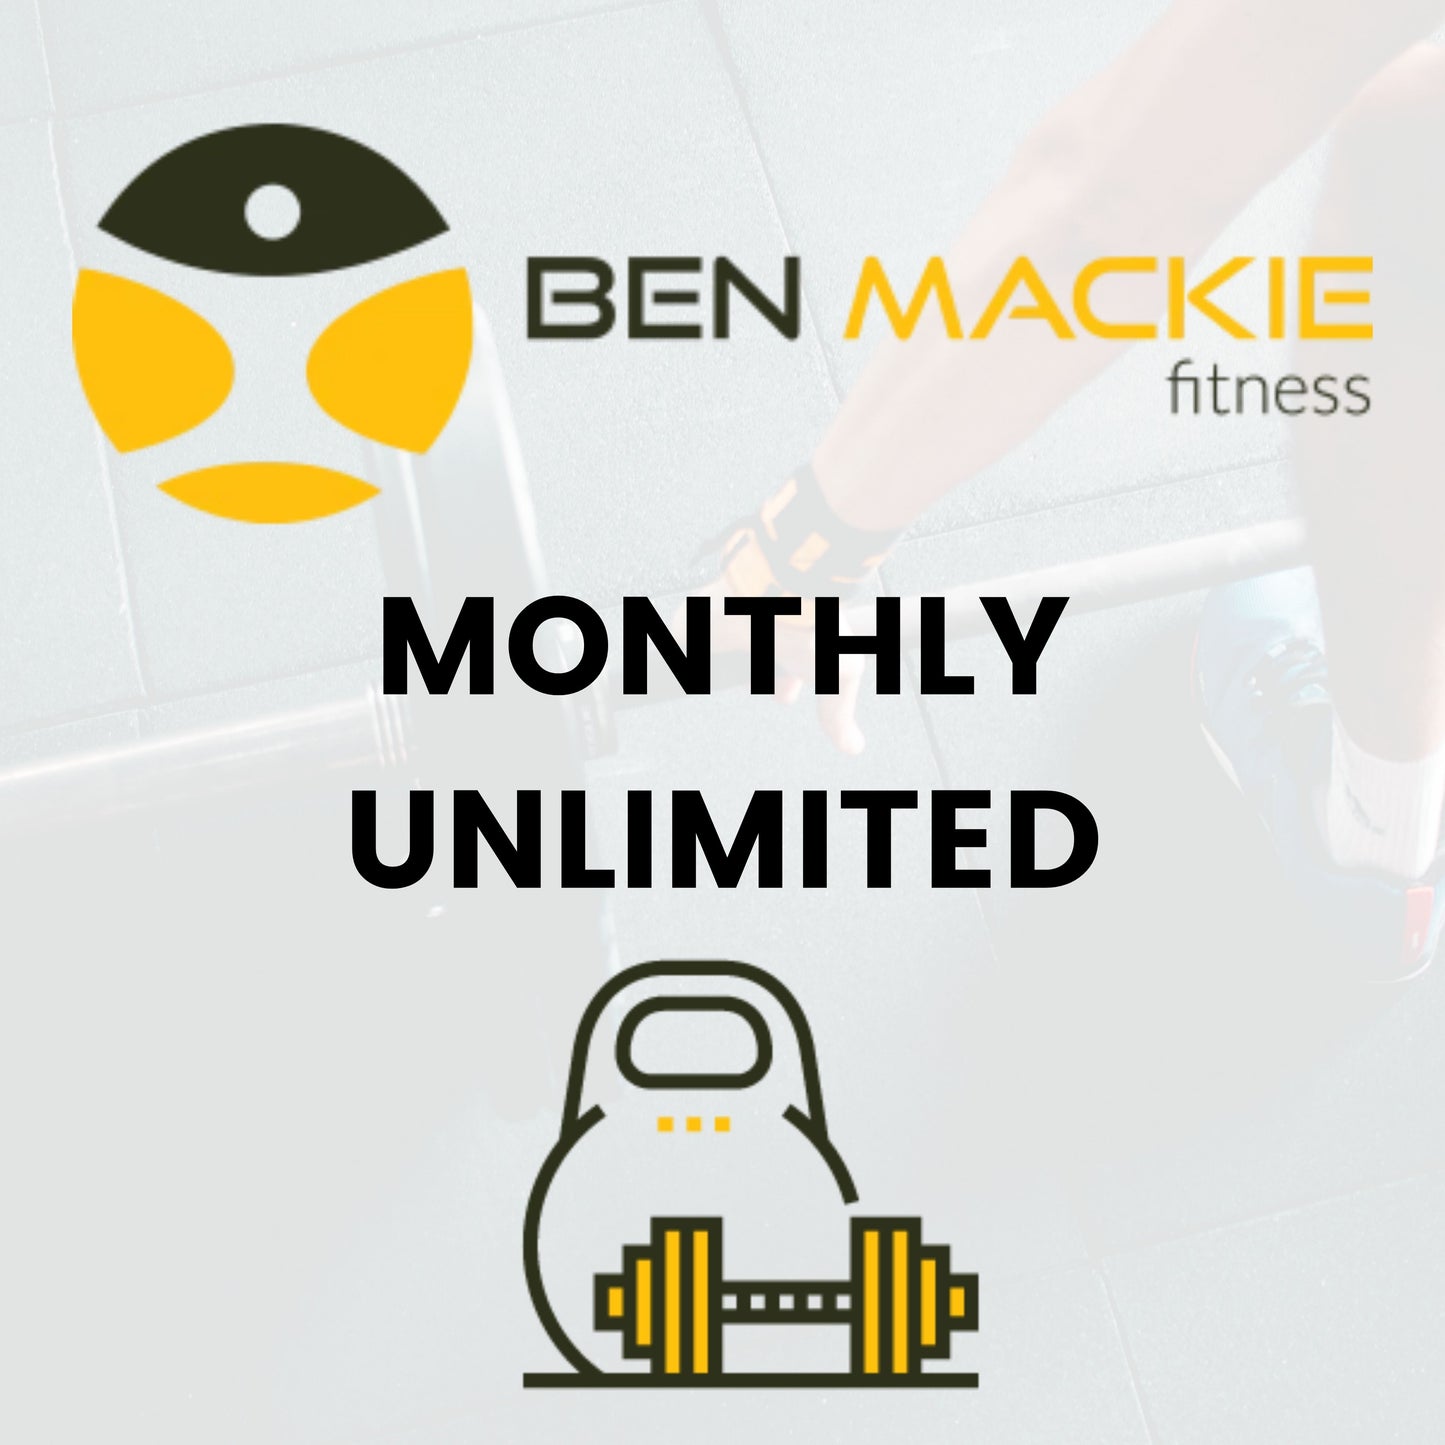 Ben Mackie Unlimited Fitness (Quarterly)